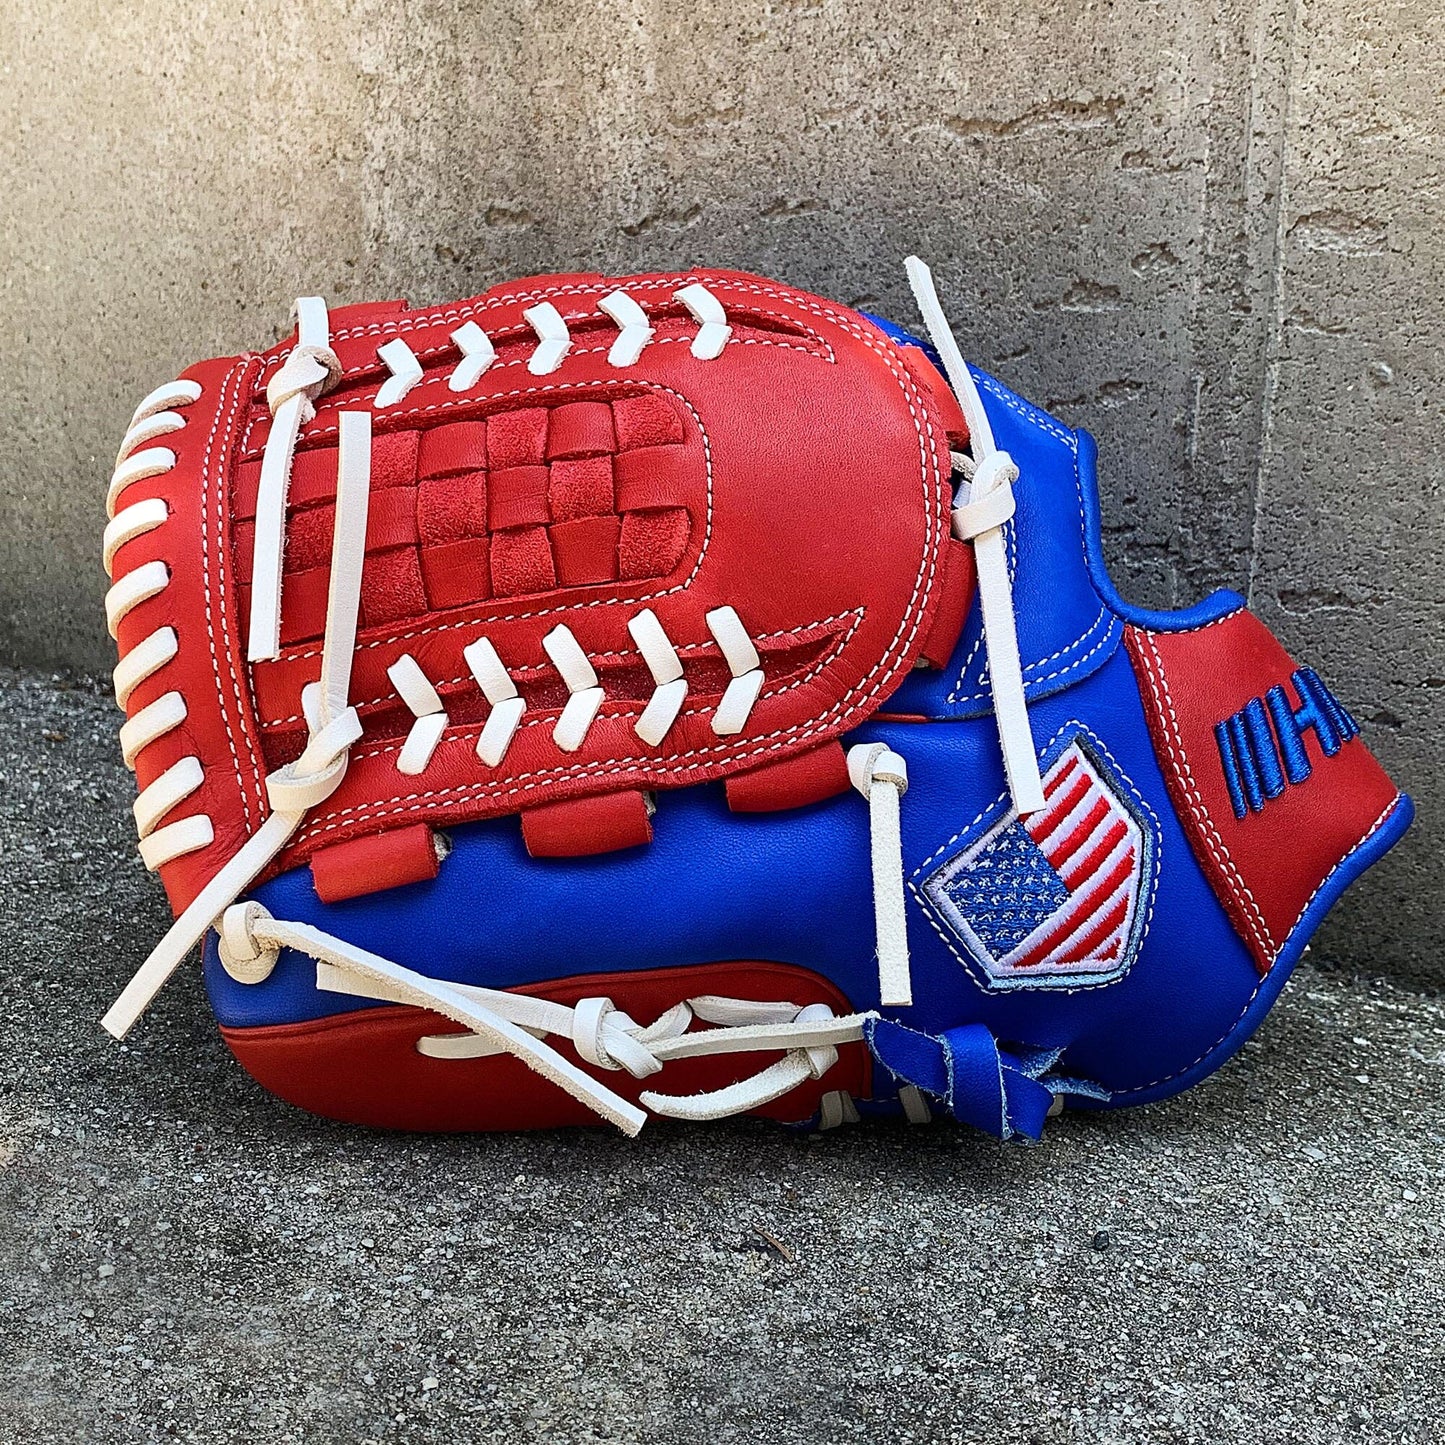 12" - Red/White/Blue -Grid and Net Web